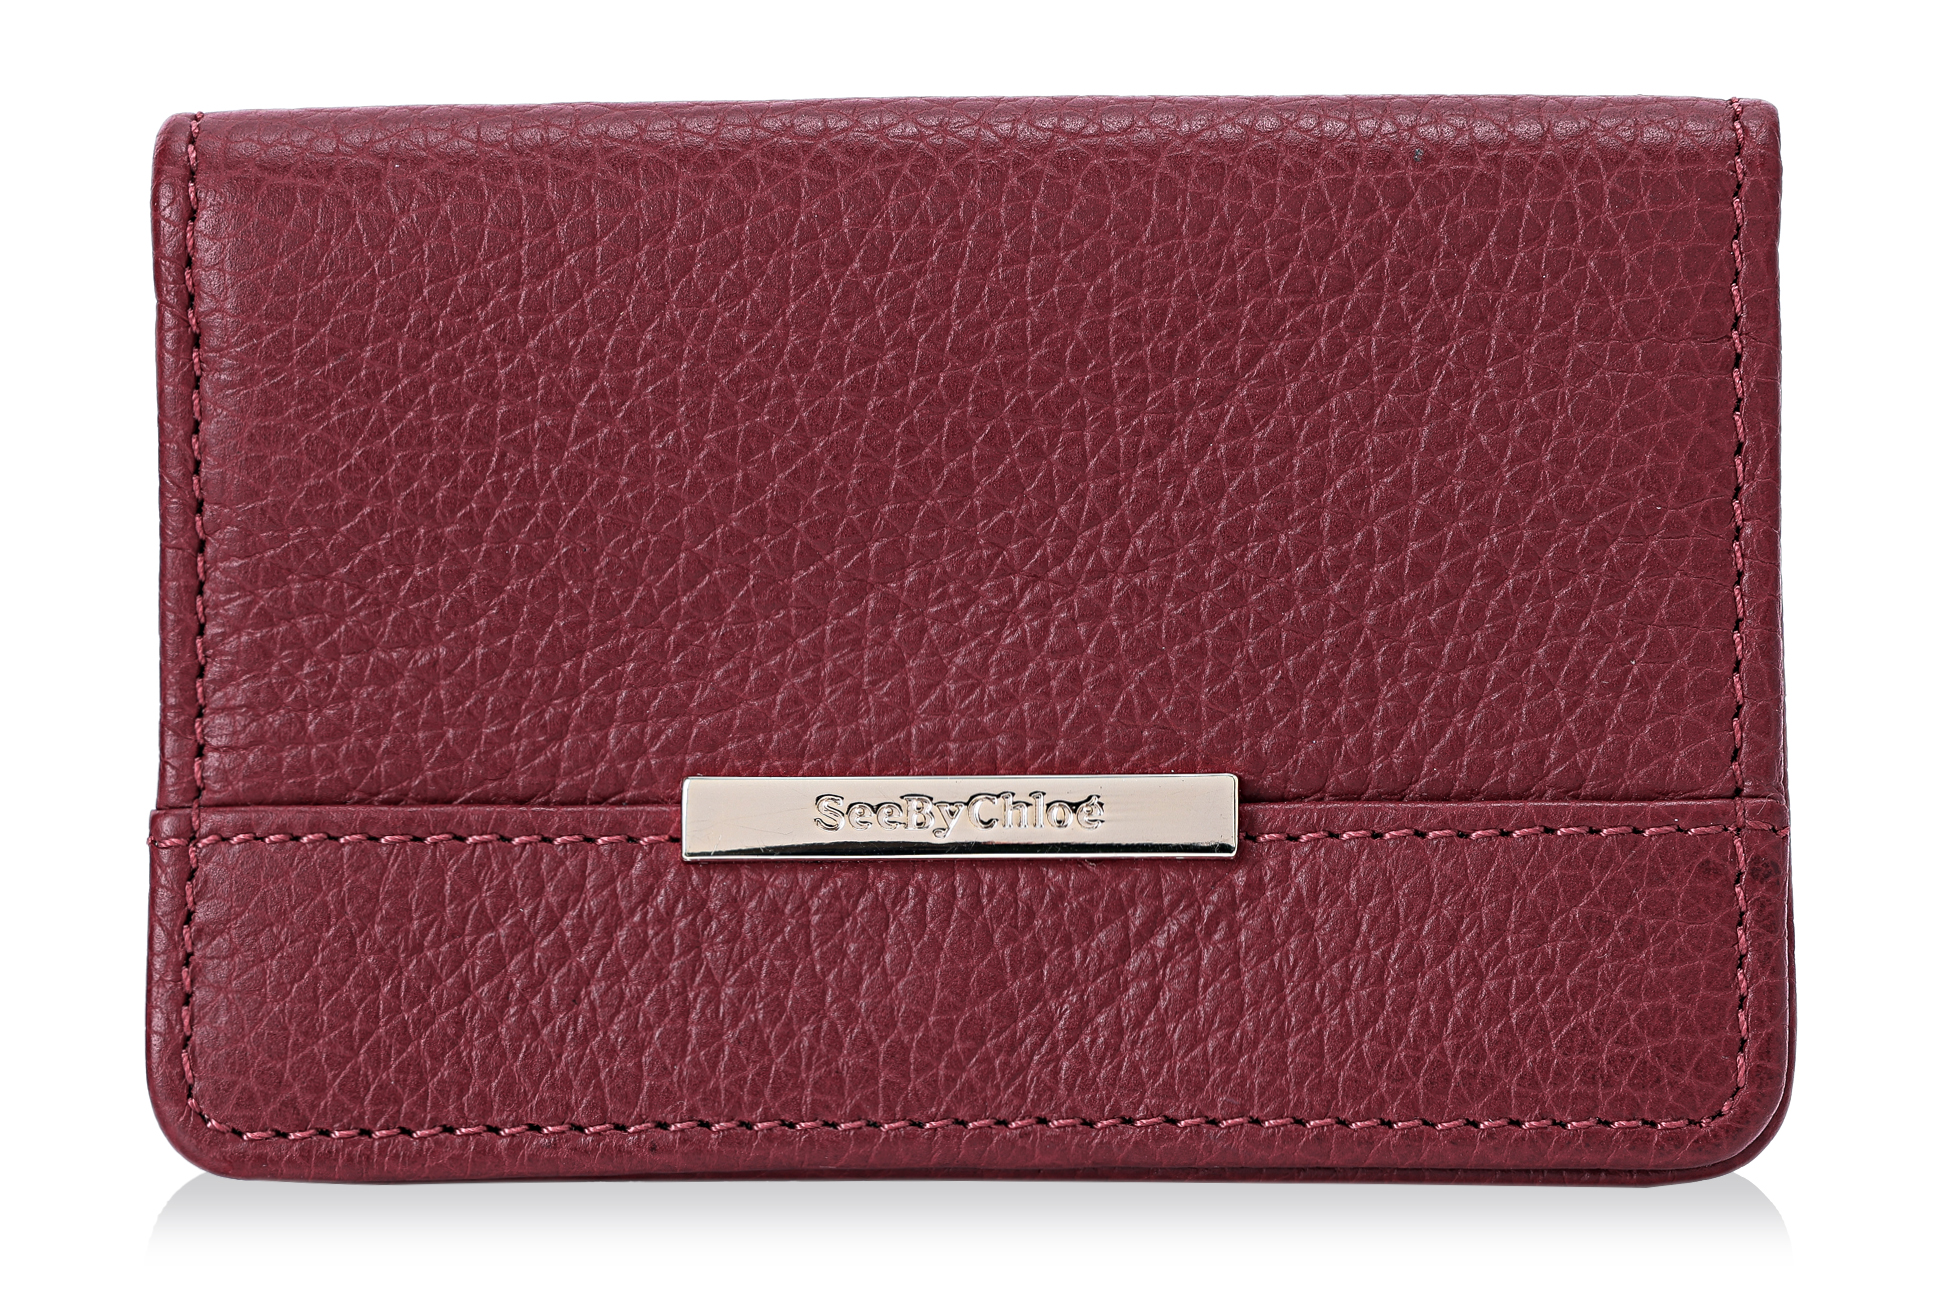 A SEE BY CHLOÉ FLAP CARD HOLDER